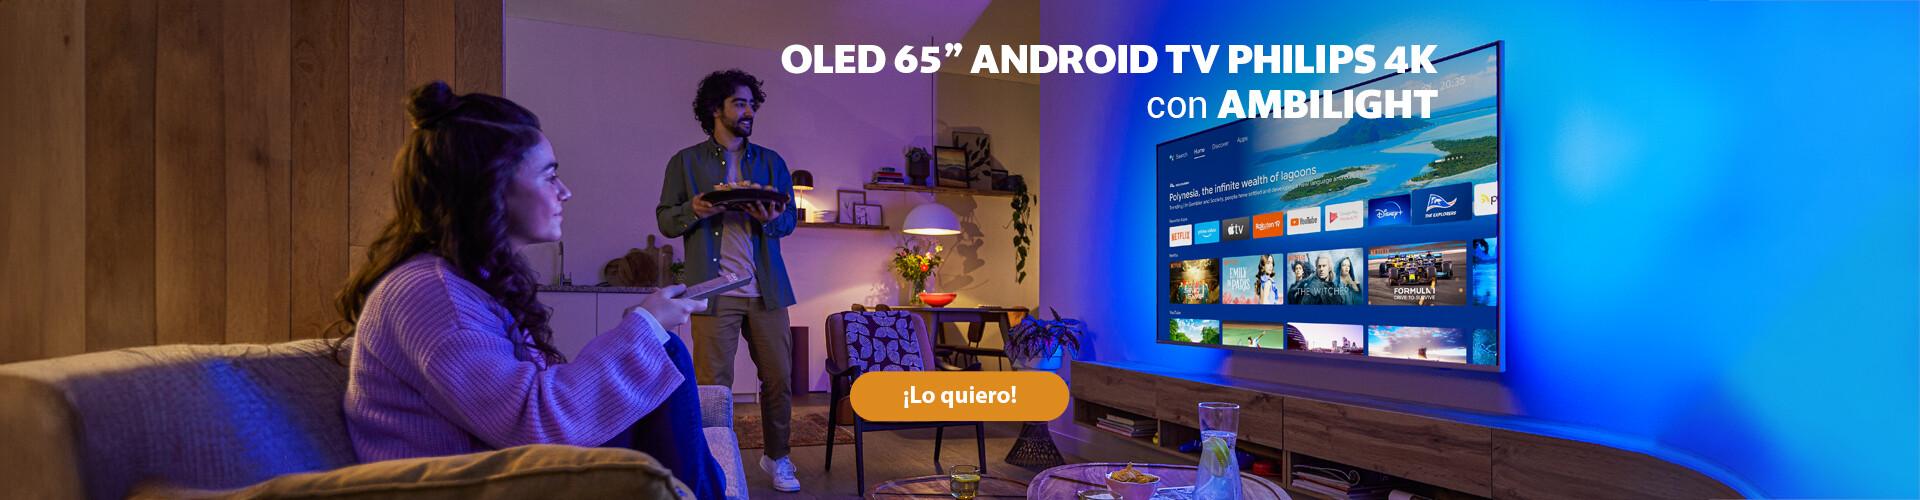 Oled 65" Android Tv Philips